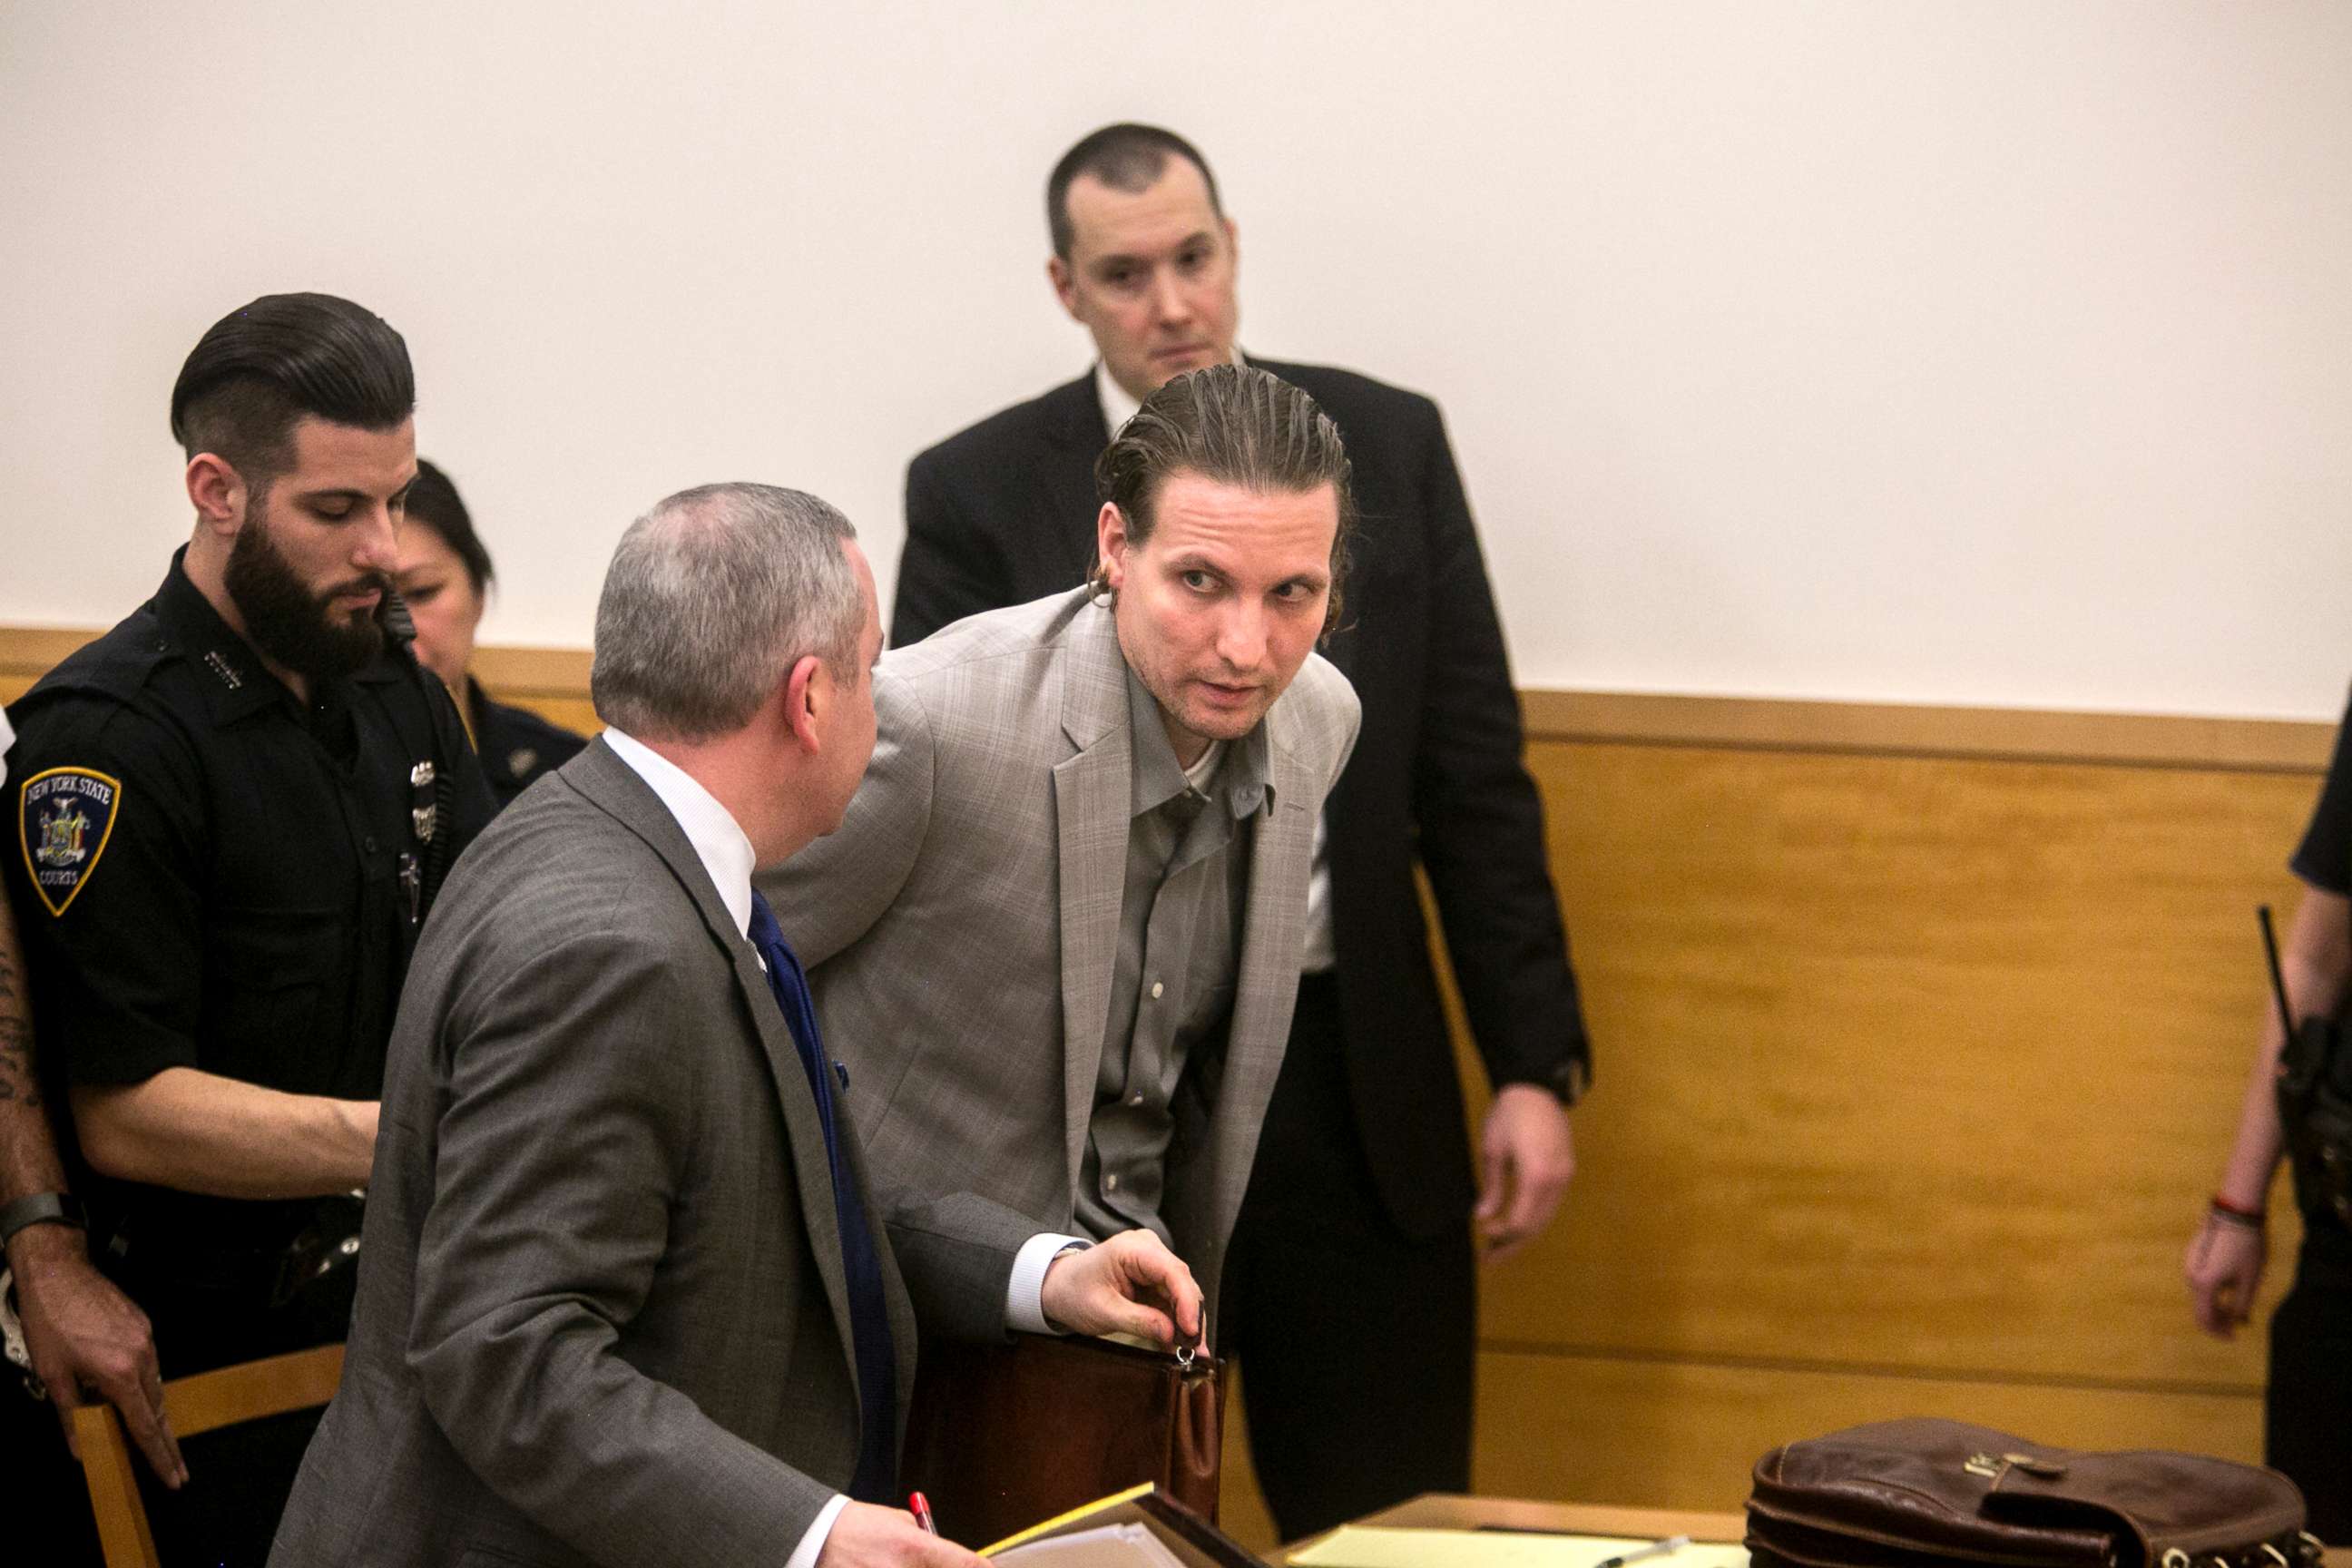 PHOTO:John Giuca, who was convicted of murder in 2005 in the death of Mark Fisher, is taken away after Judge Danny Chun decided not to release him while awaiting a retrial at Brooklyn Supreme Court in Brooklyn, New York, Feb. 20, 2018.